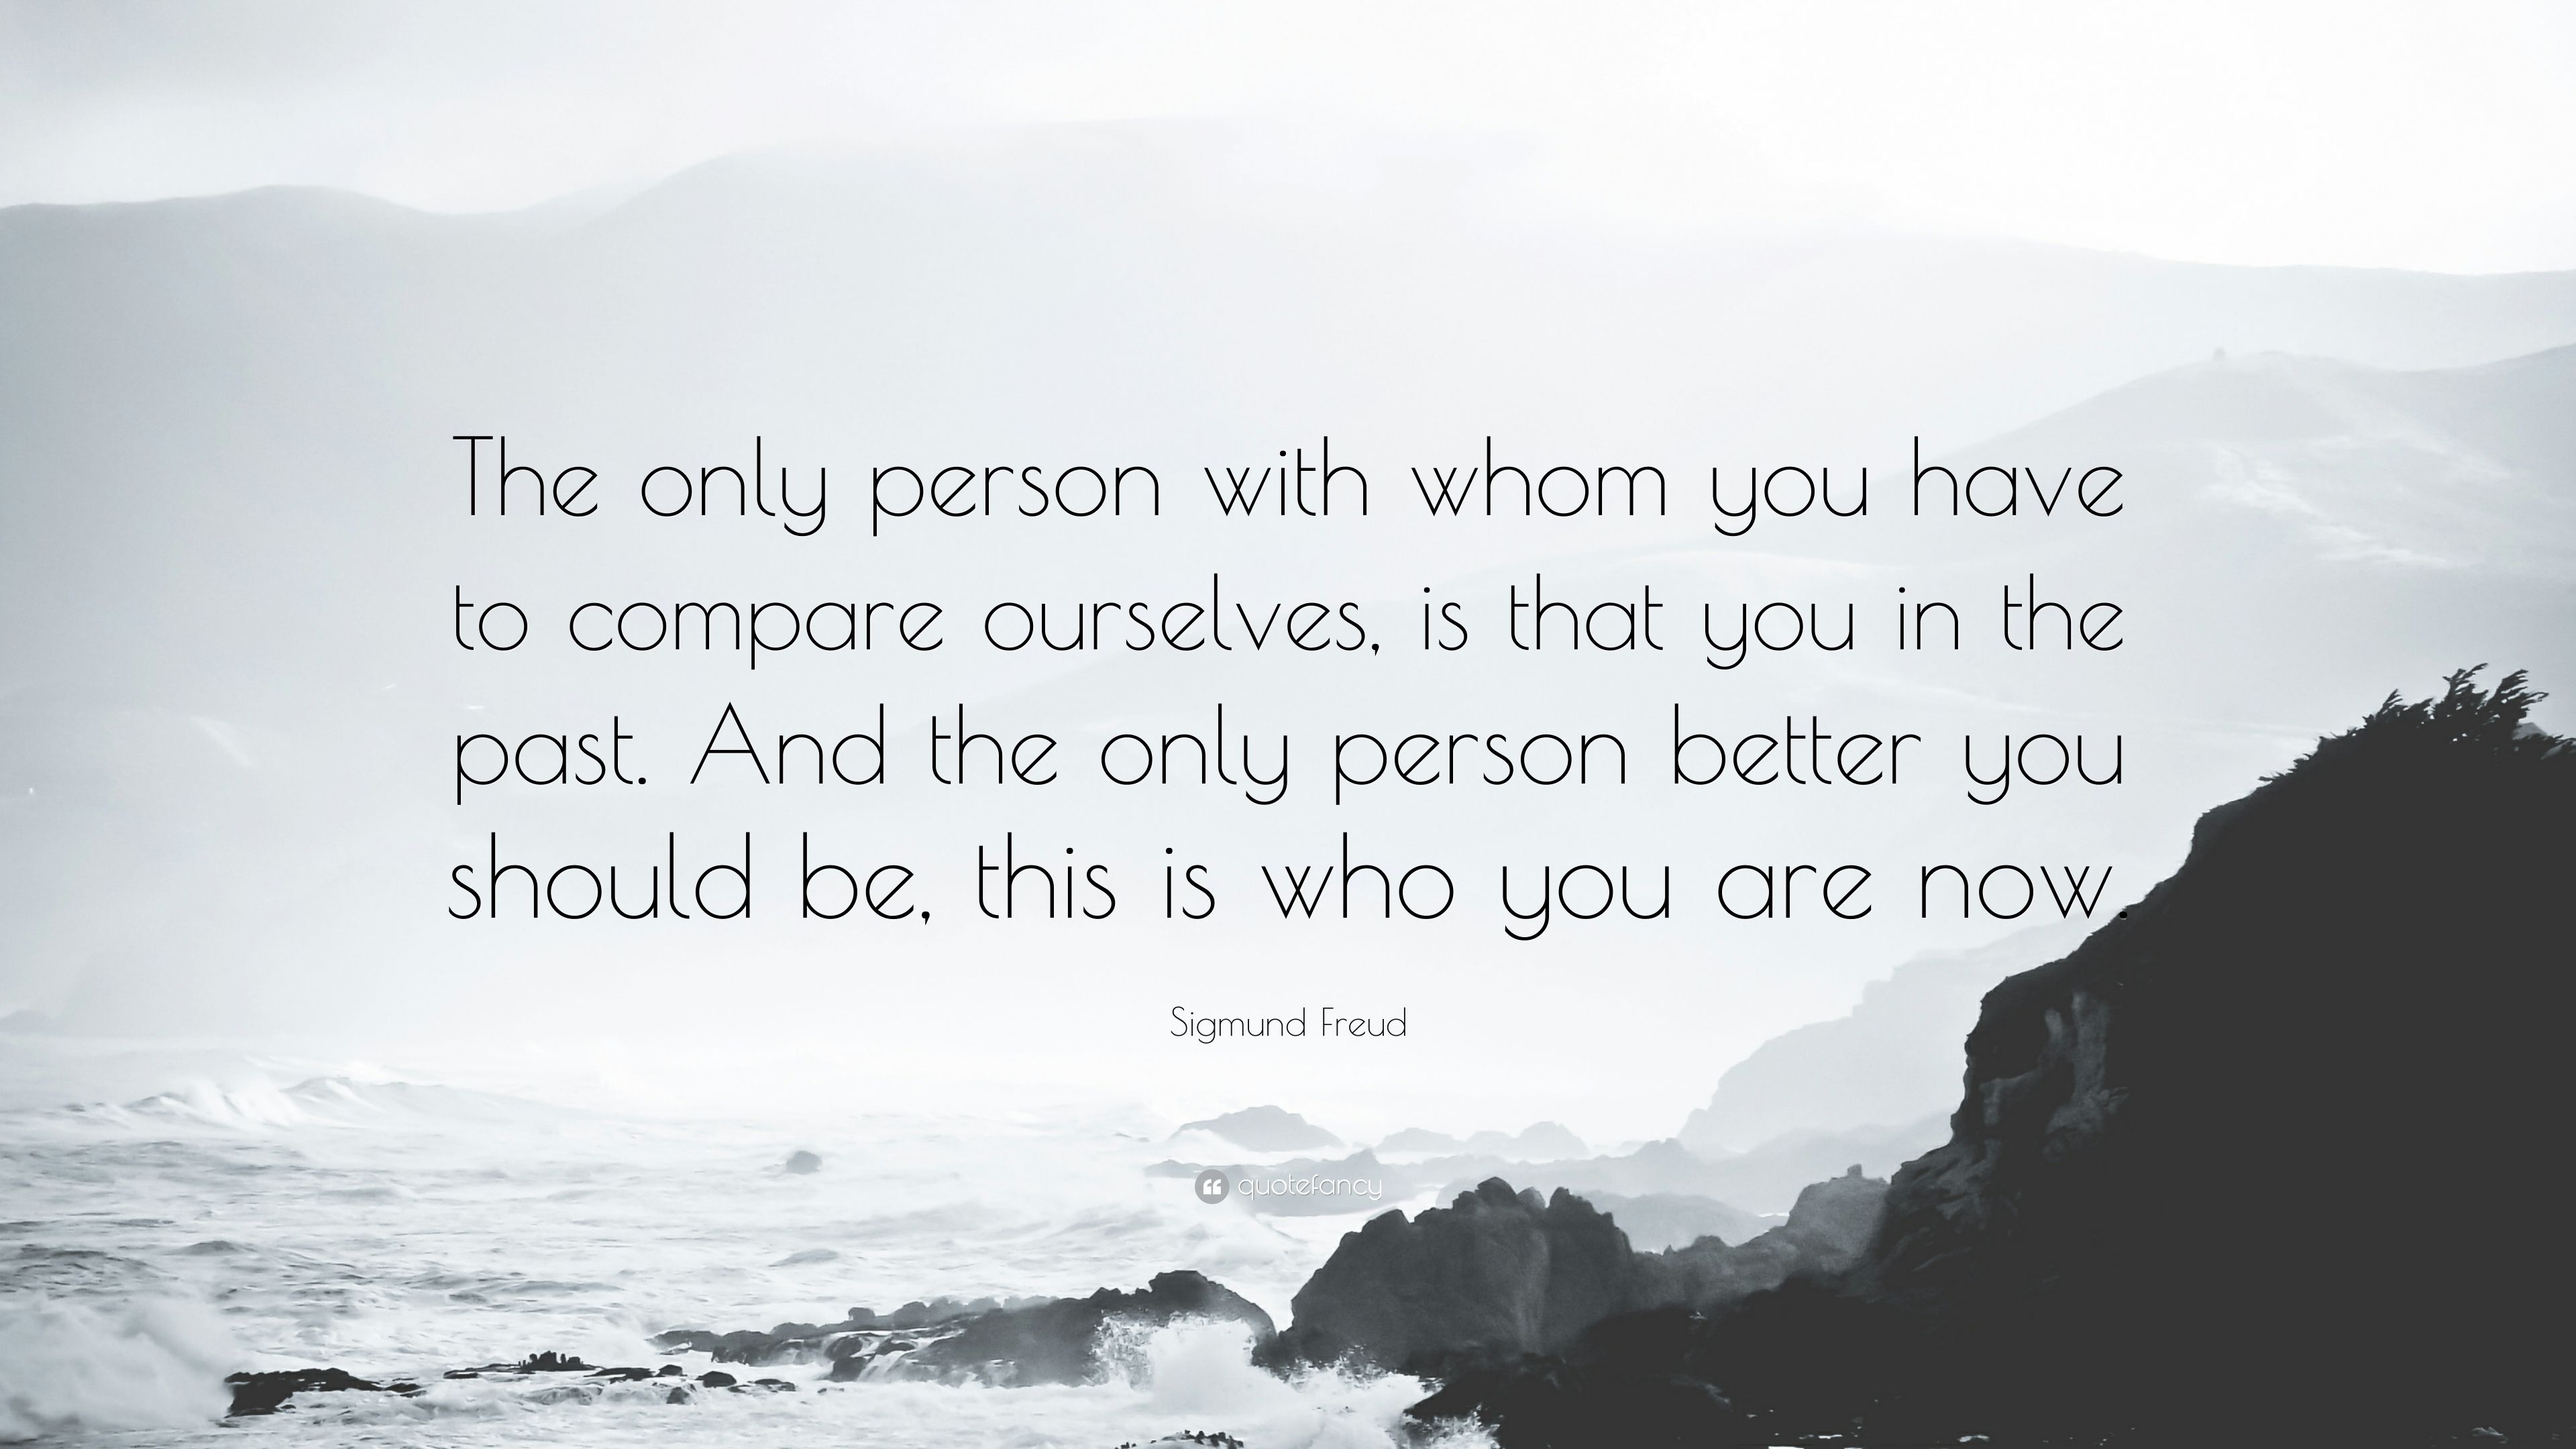 Sigmund Freud Quote: “The only person with whom you have to